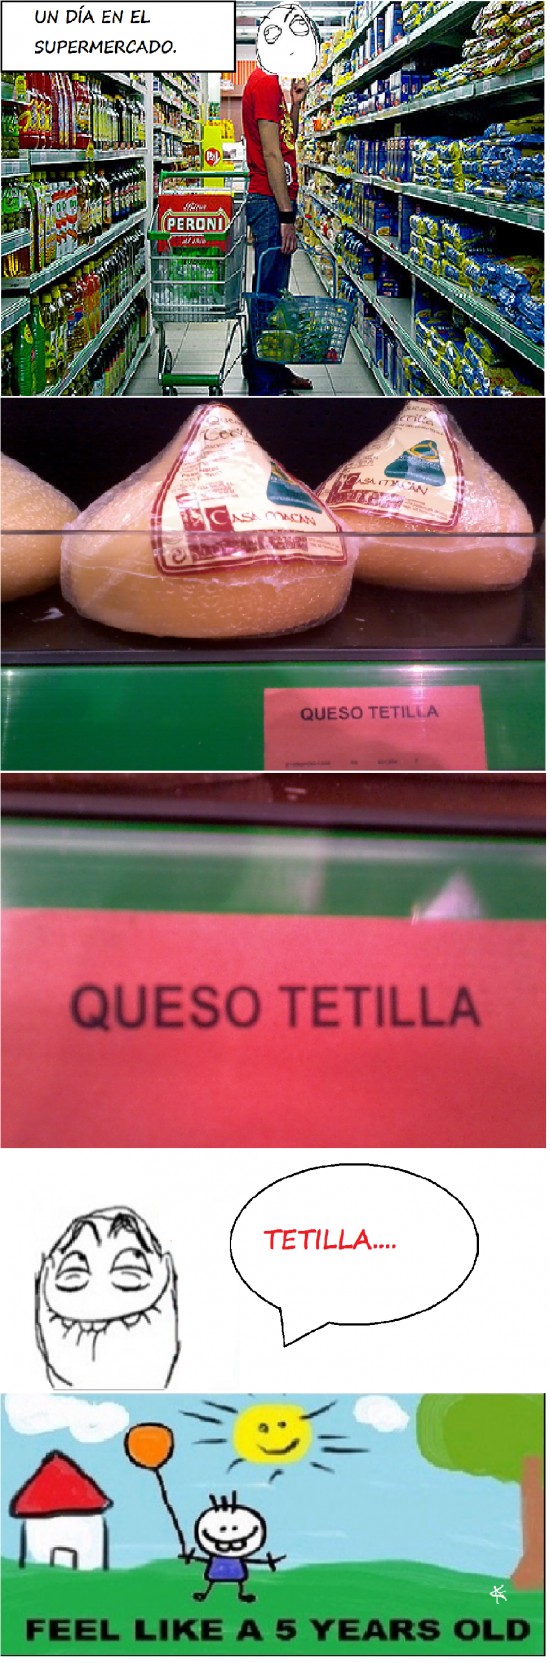 Like_a_5_years_old - Queso tetilla